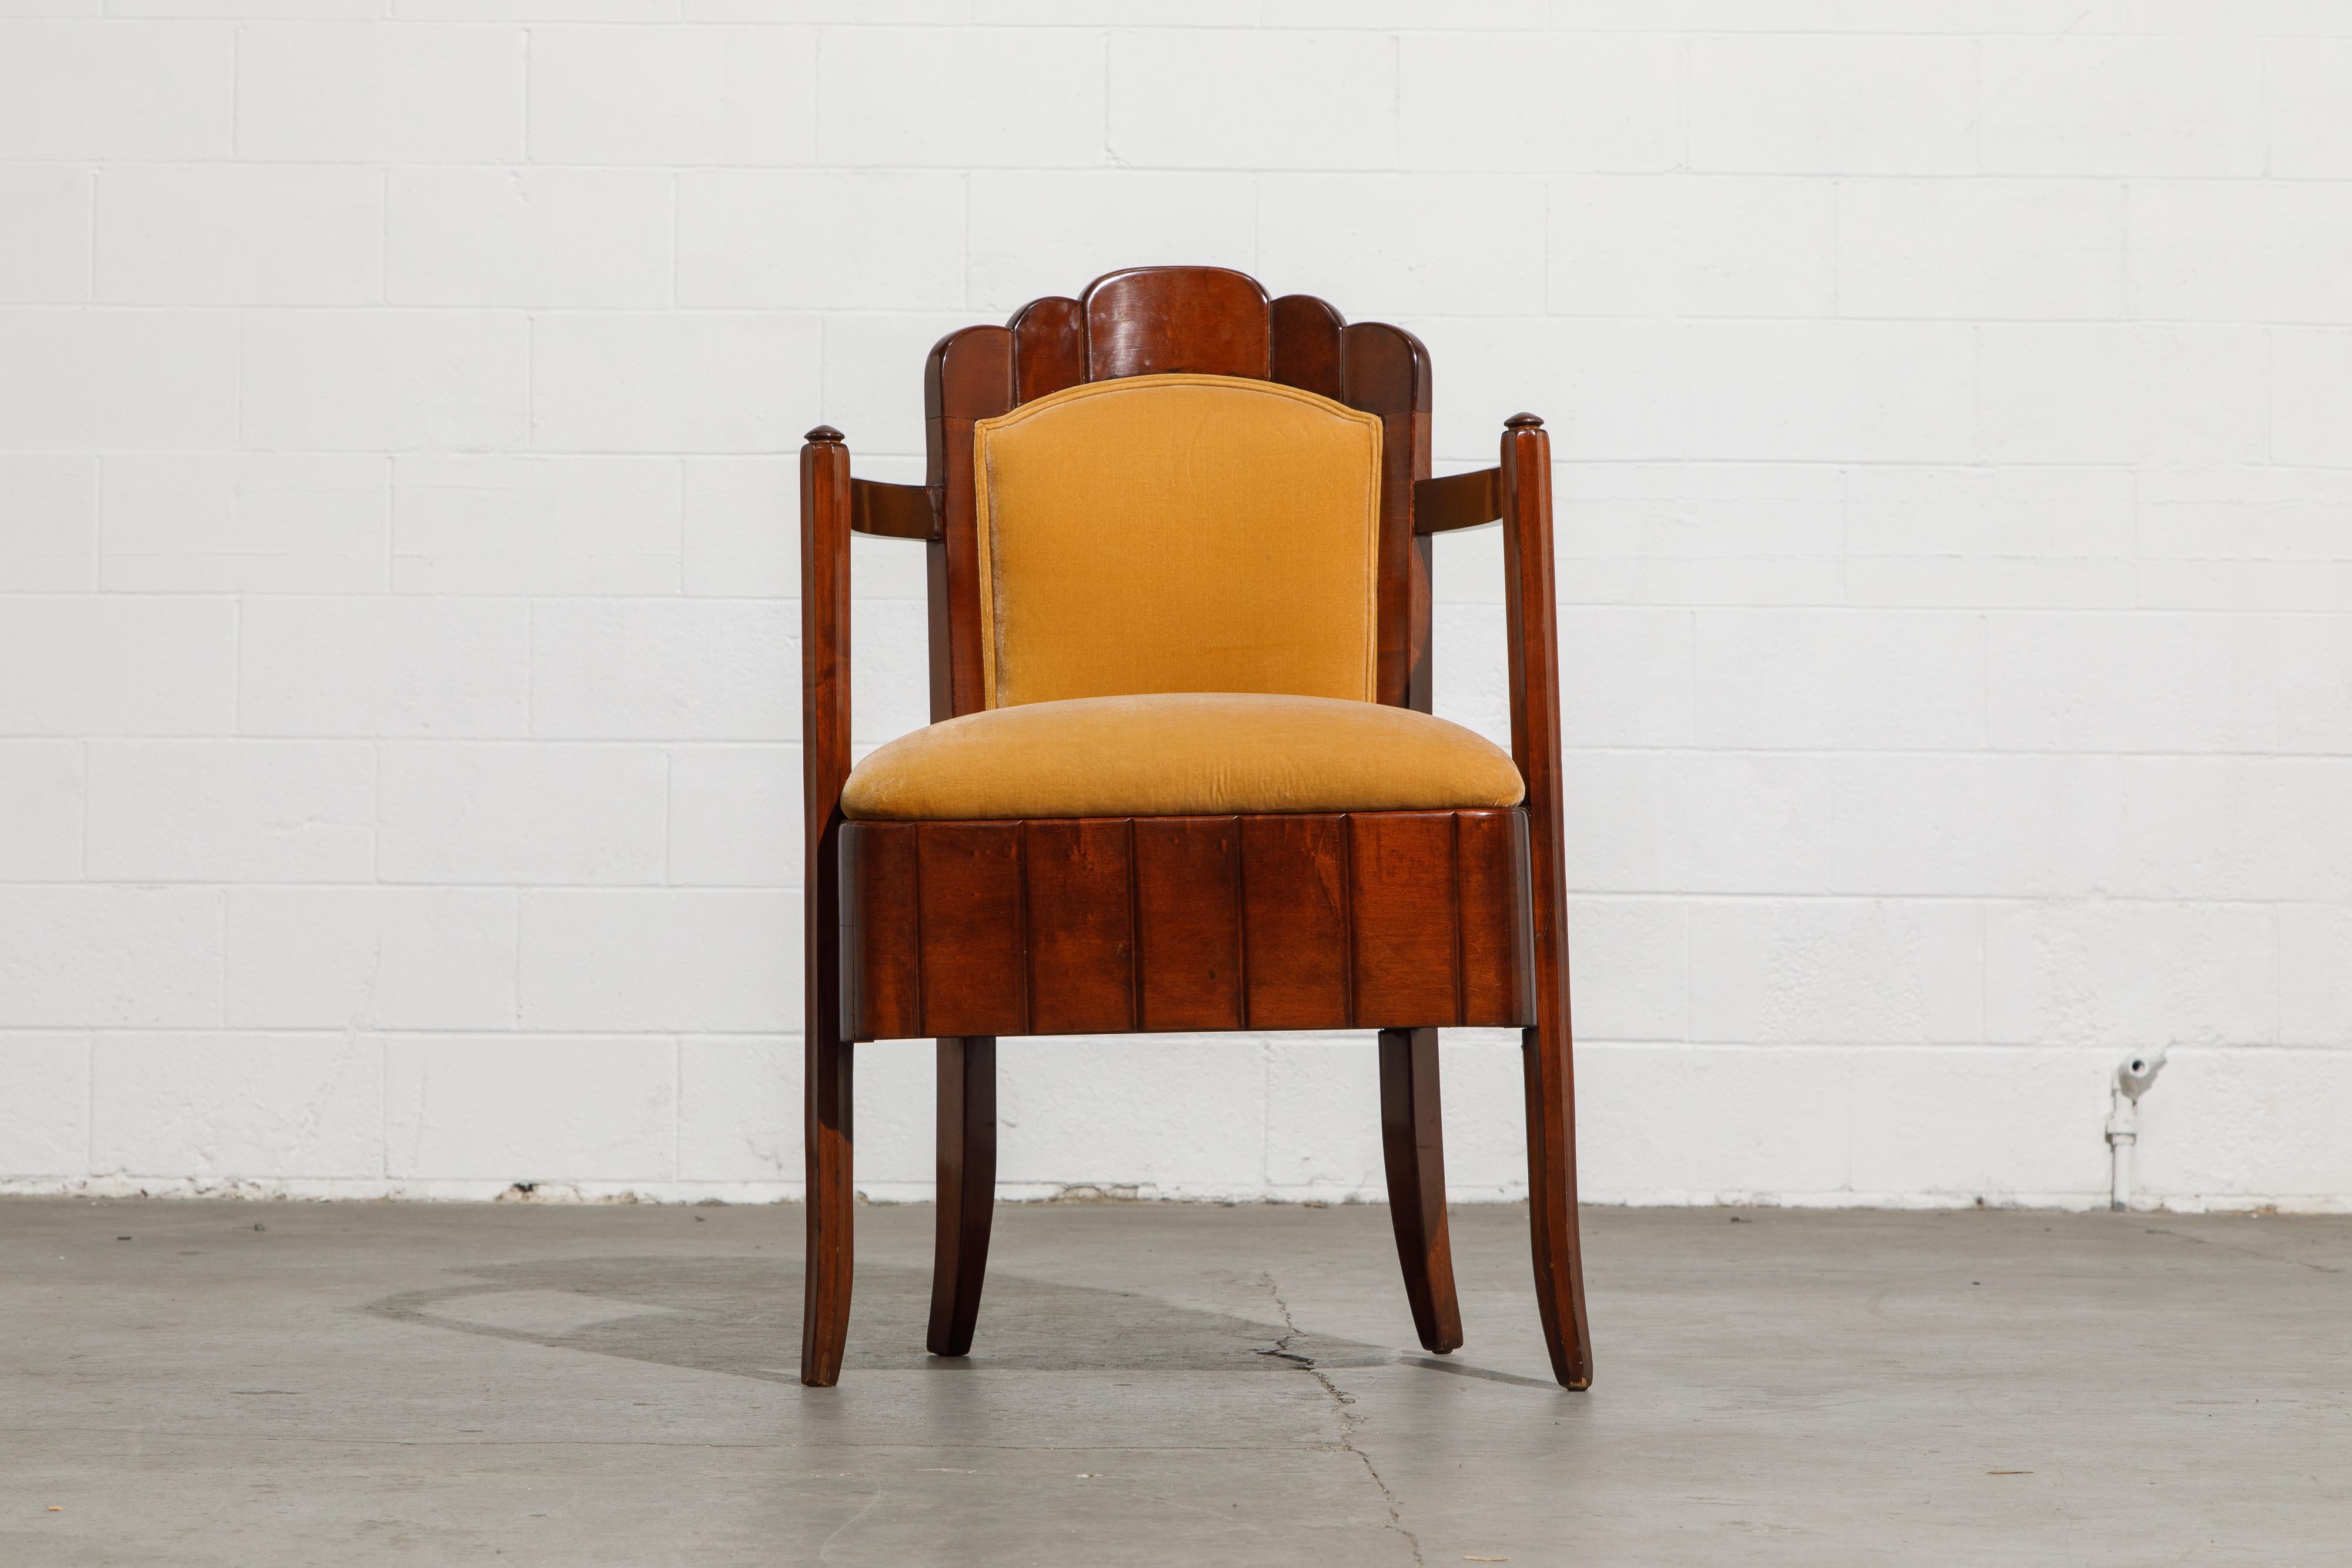 Velvet Important Pierre Patout Mahogany Dining Chairs from S.S. Île de France, c. 1927 For Sale